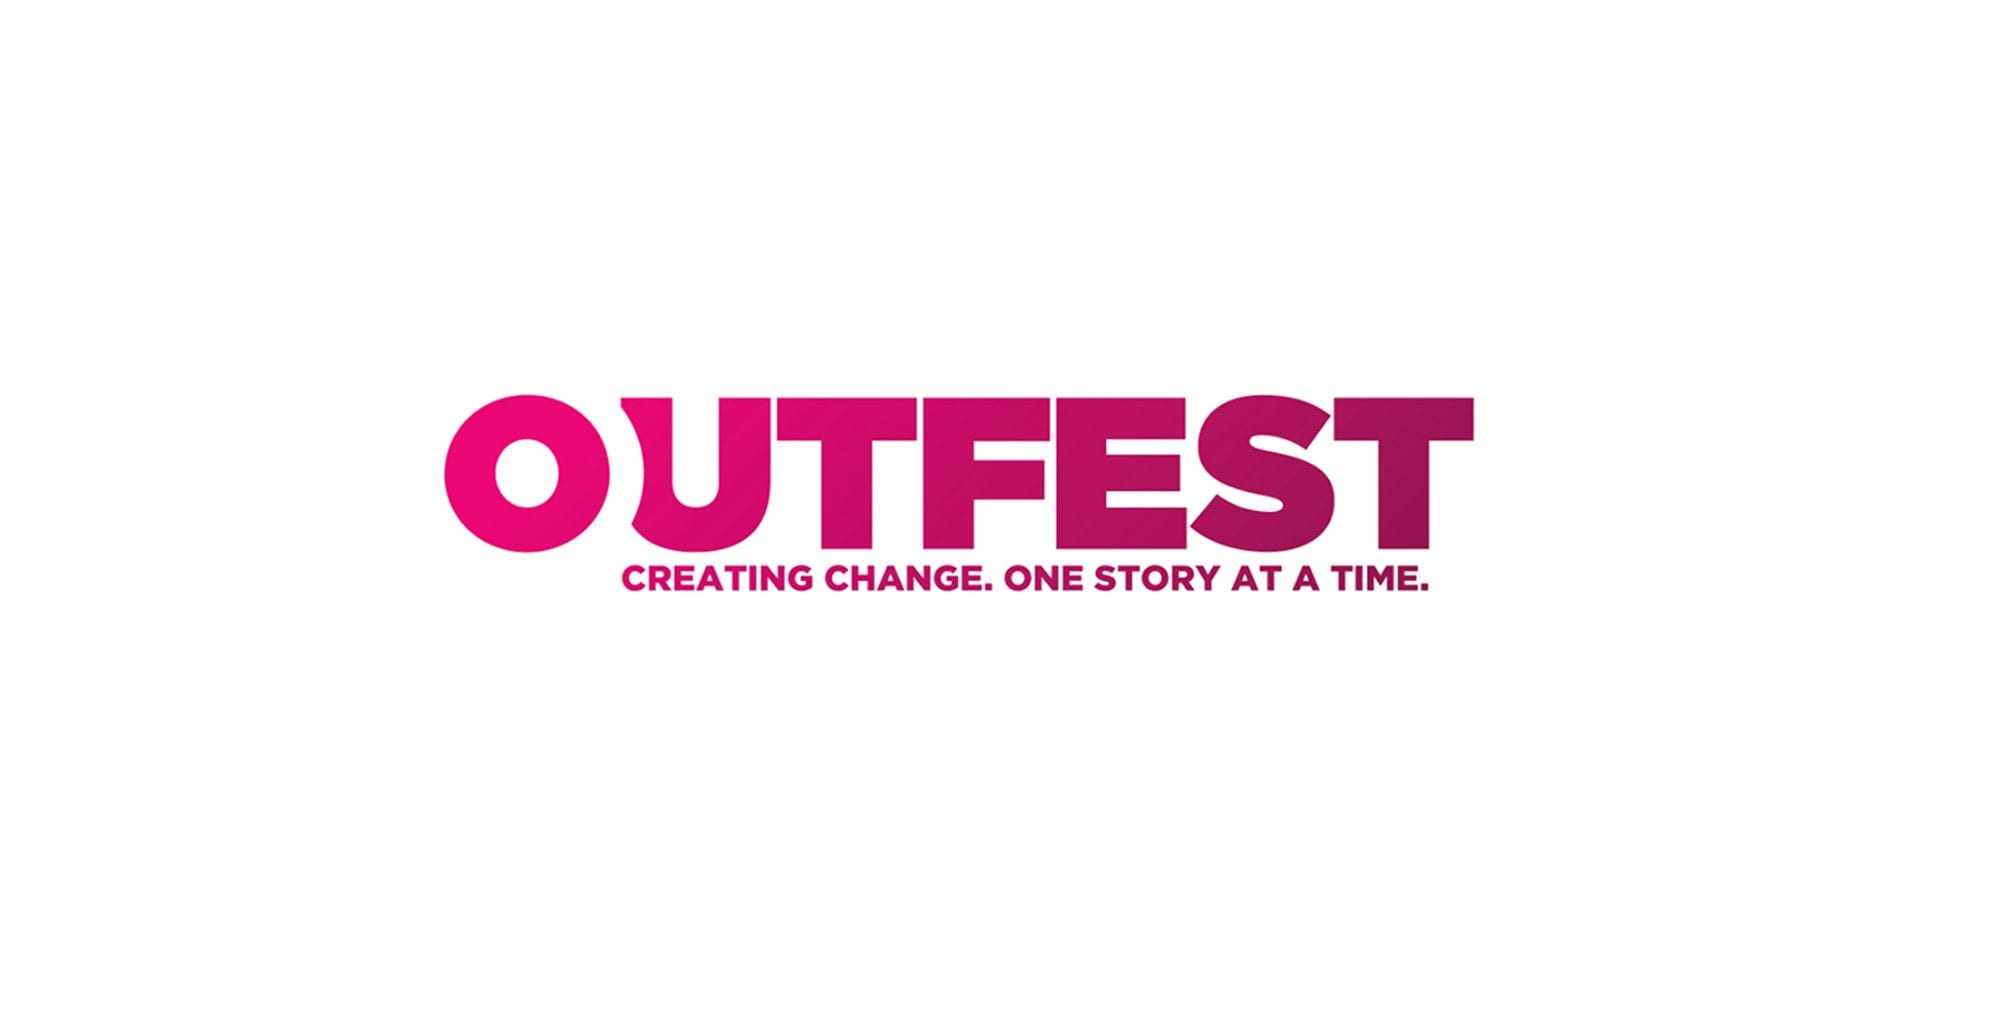 Founded by UCLA students in 1982, Outfest – which runs several film festivals each celebrating a different aspect of the LGBTQI community and filmmaking – uses the power of movies to promote acceptance and equality for all LGBTQI people.